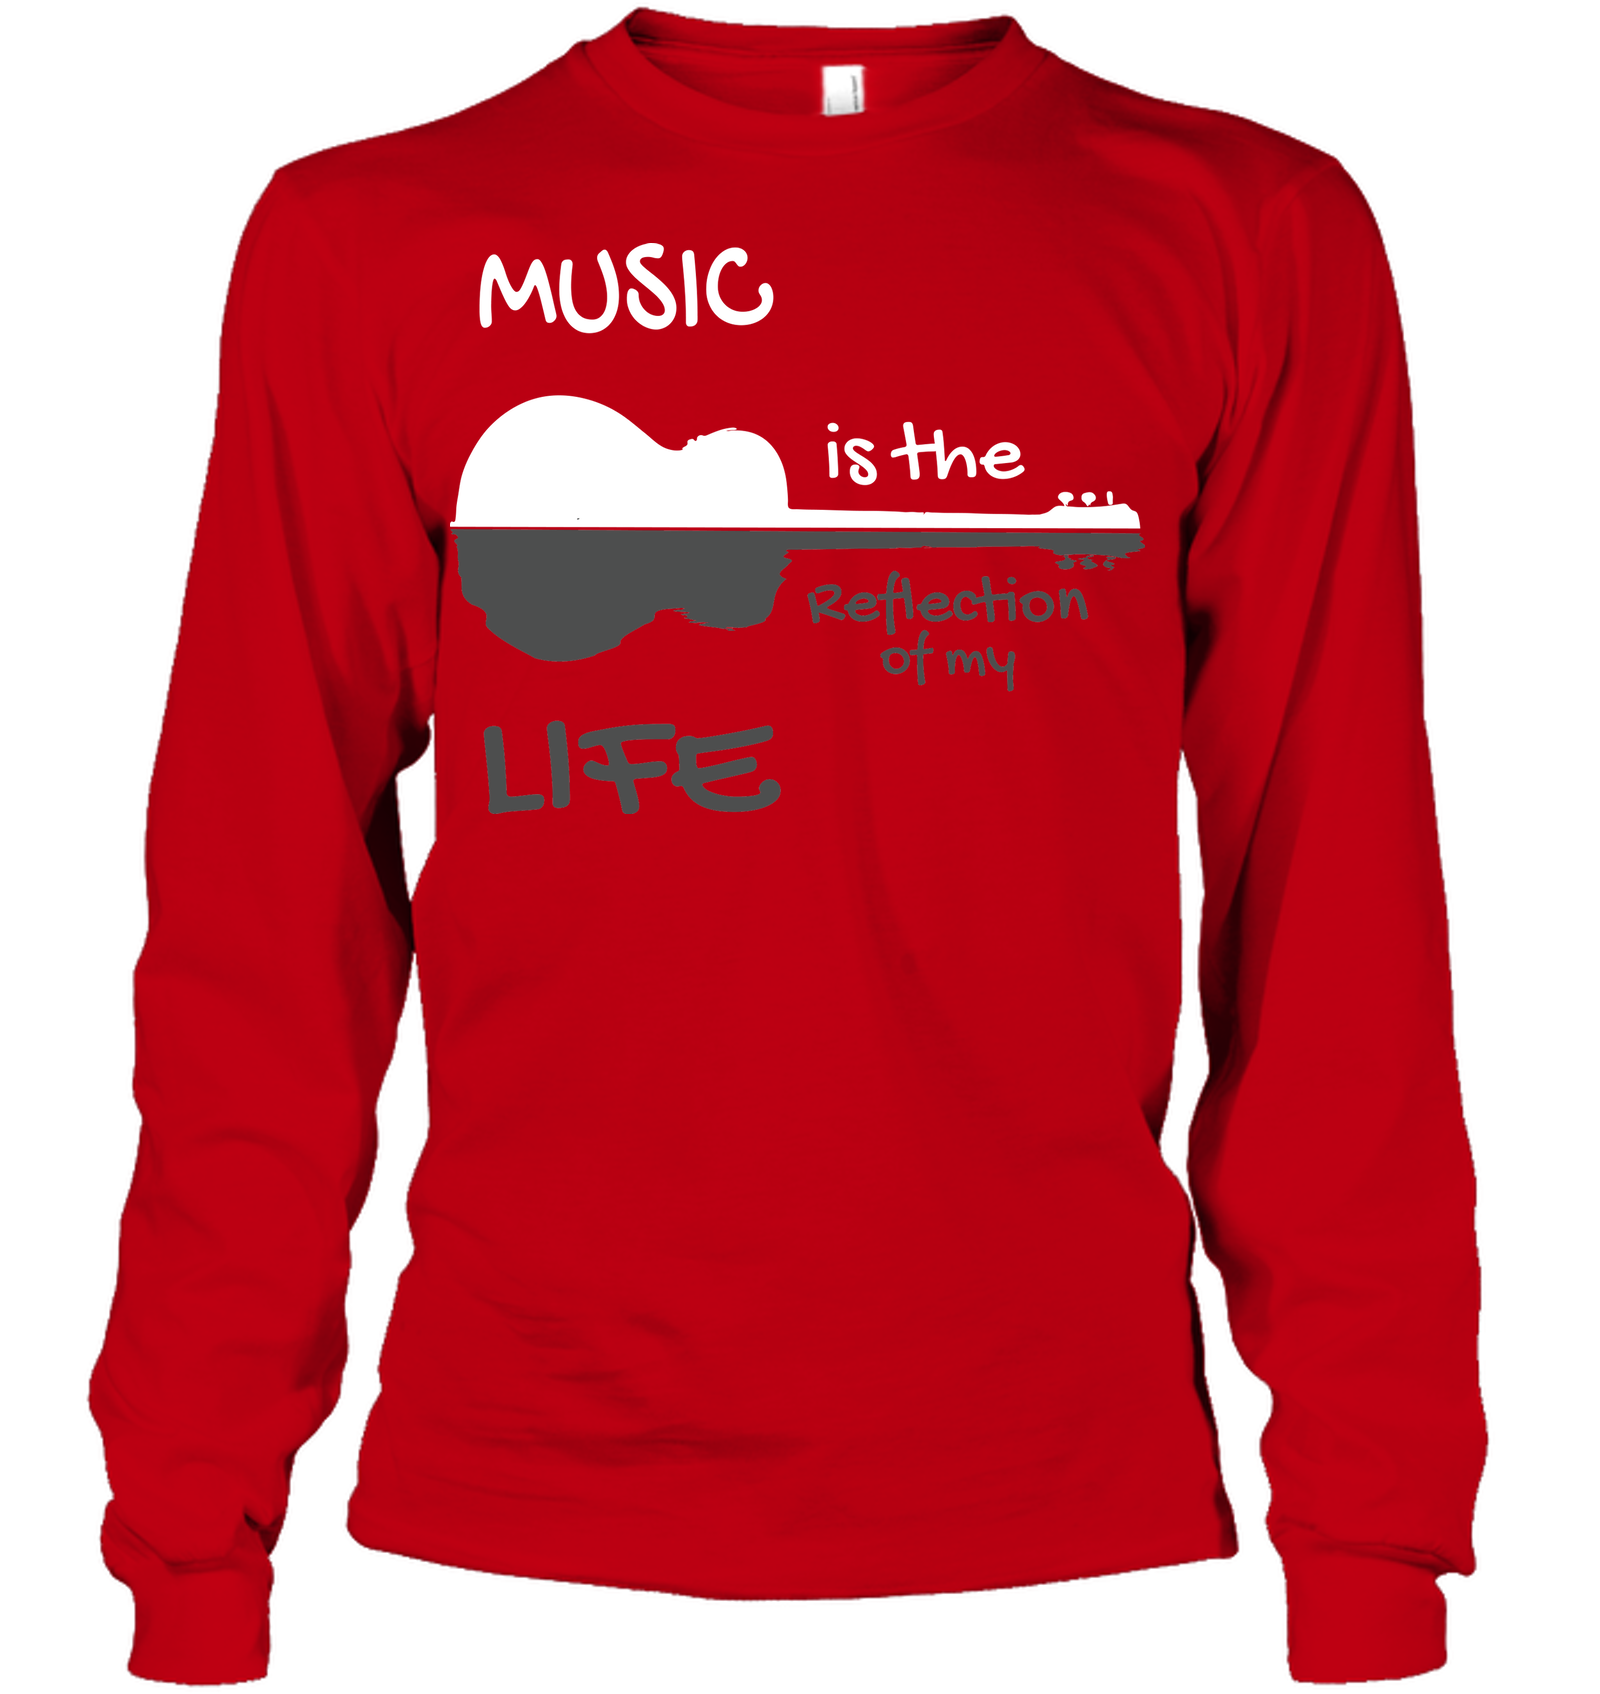 Music is the Reflection of my Life- Gildan Adult Classic Long Sleeve T-Shirt